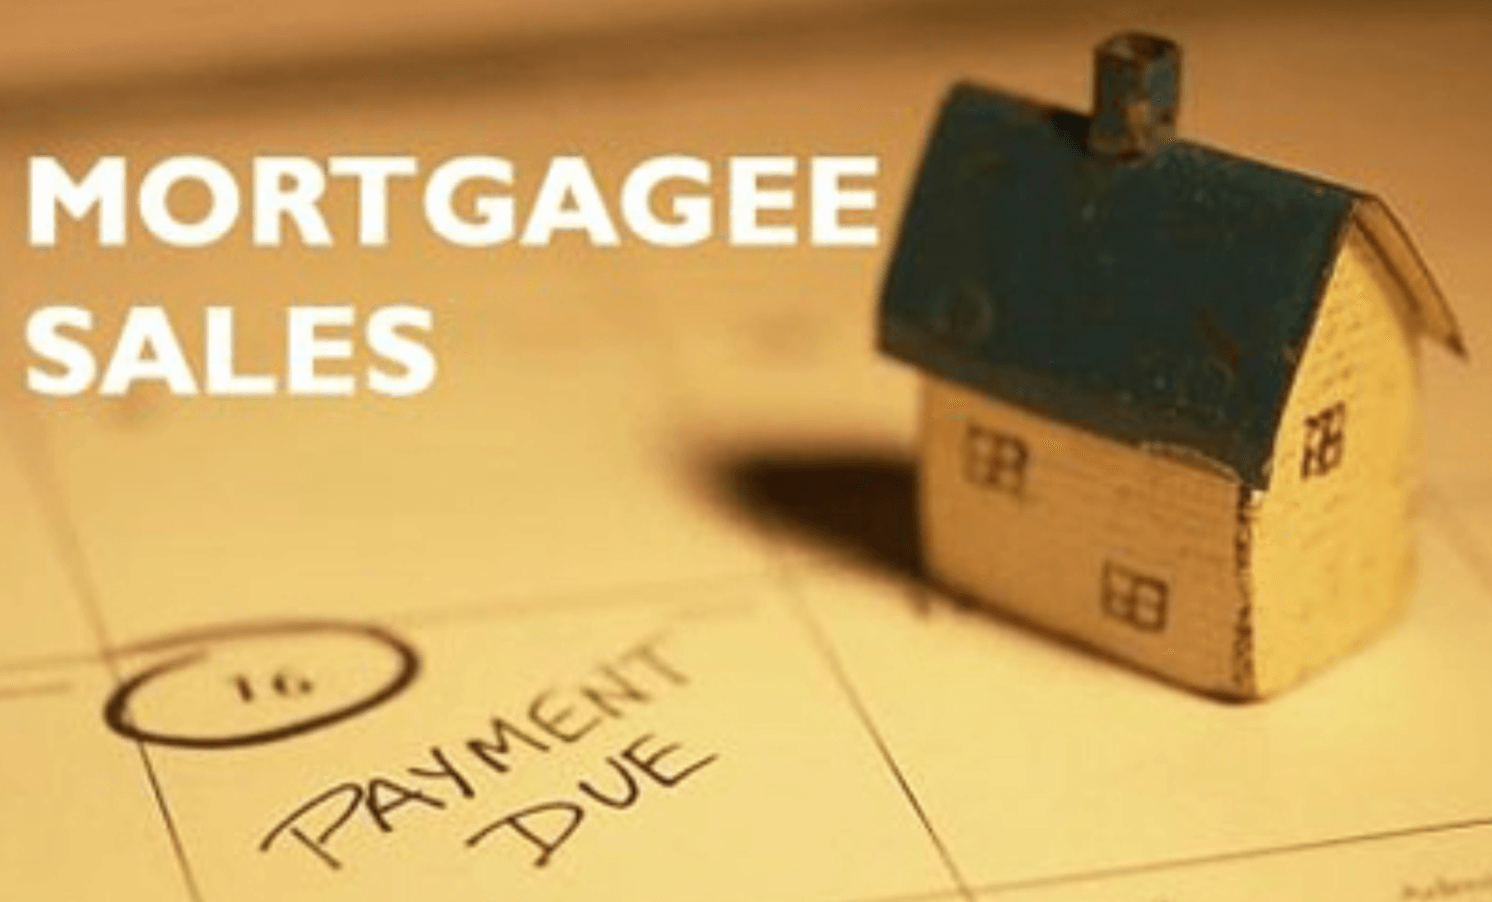 Risks of buying at mortgagee sale